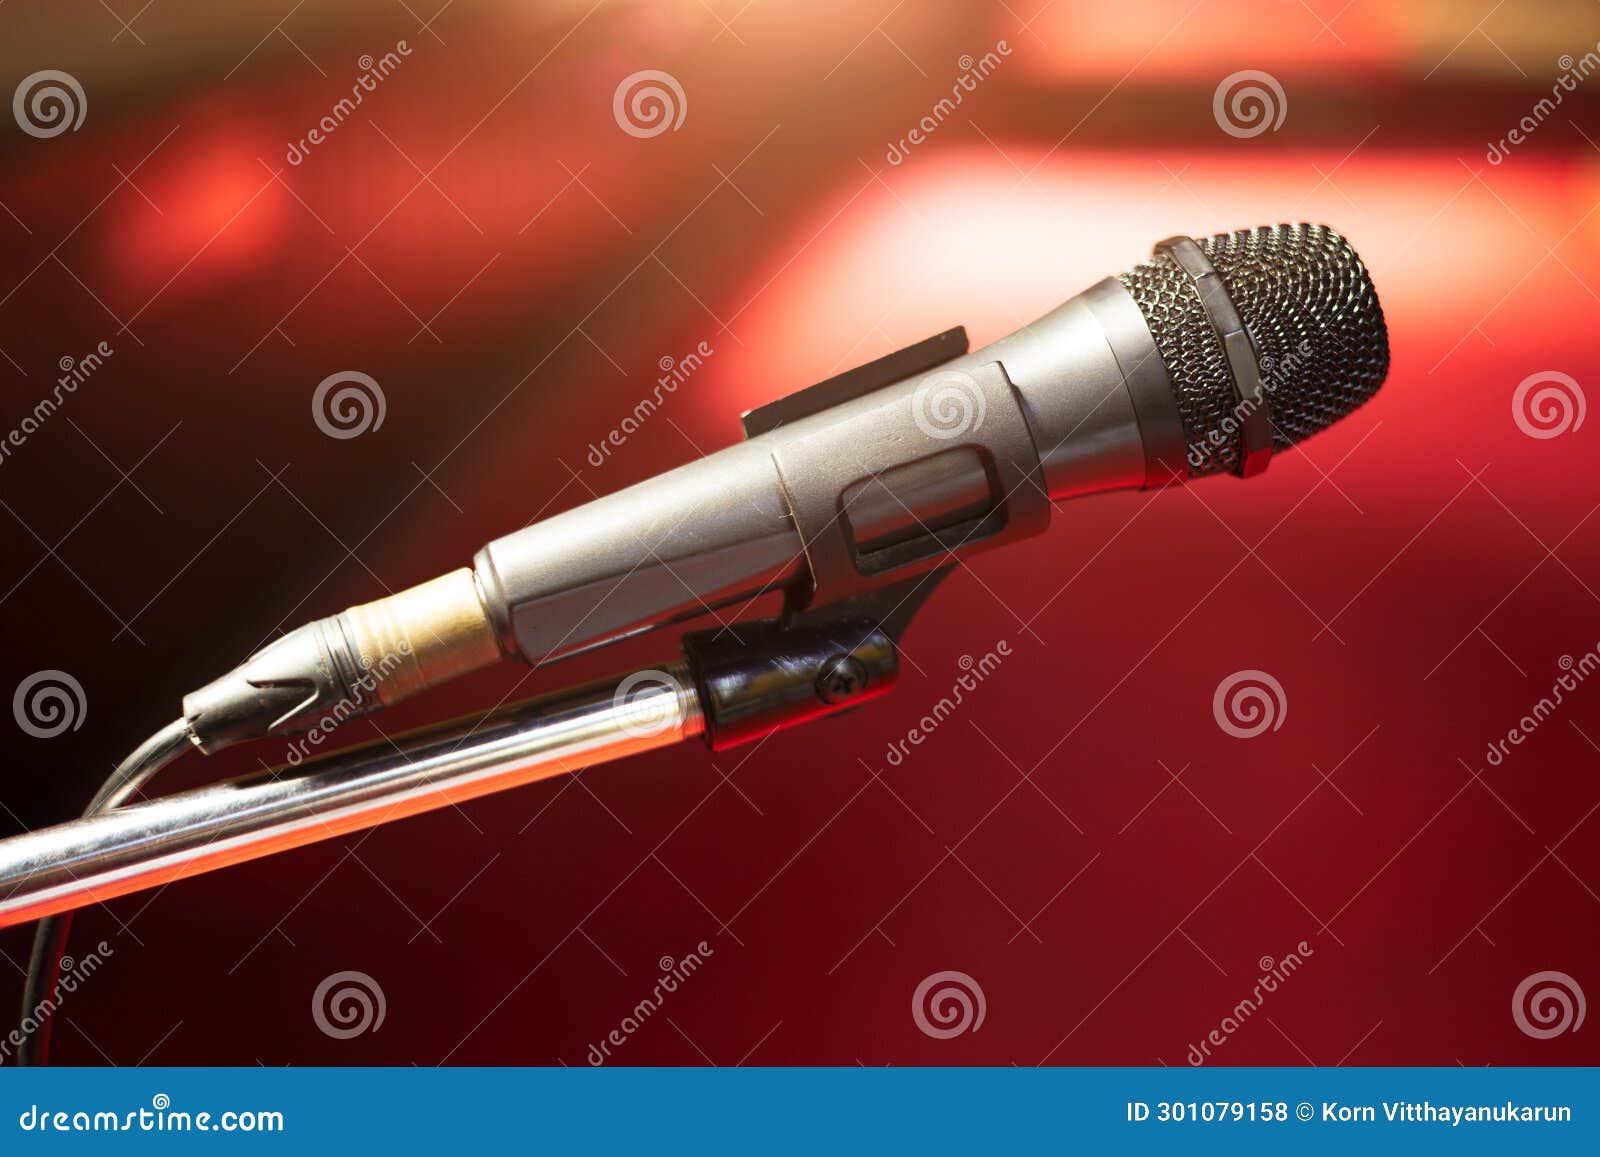 microphone closeup for analog sound amplify equipment for announcements ceremonies singing, modern media broadcast device